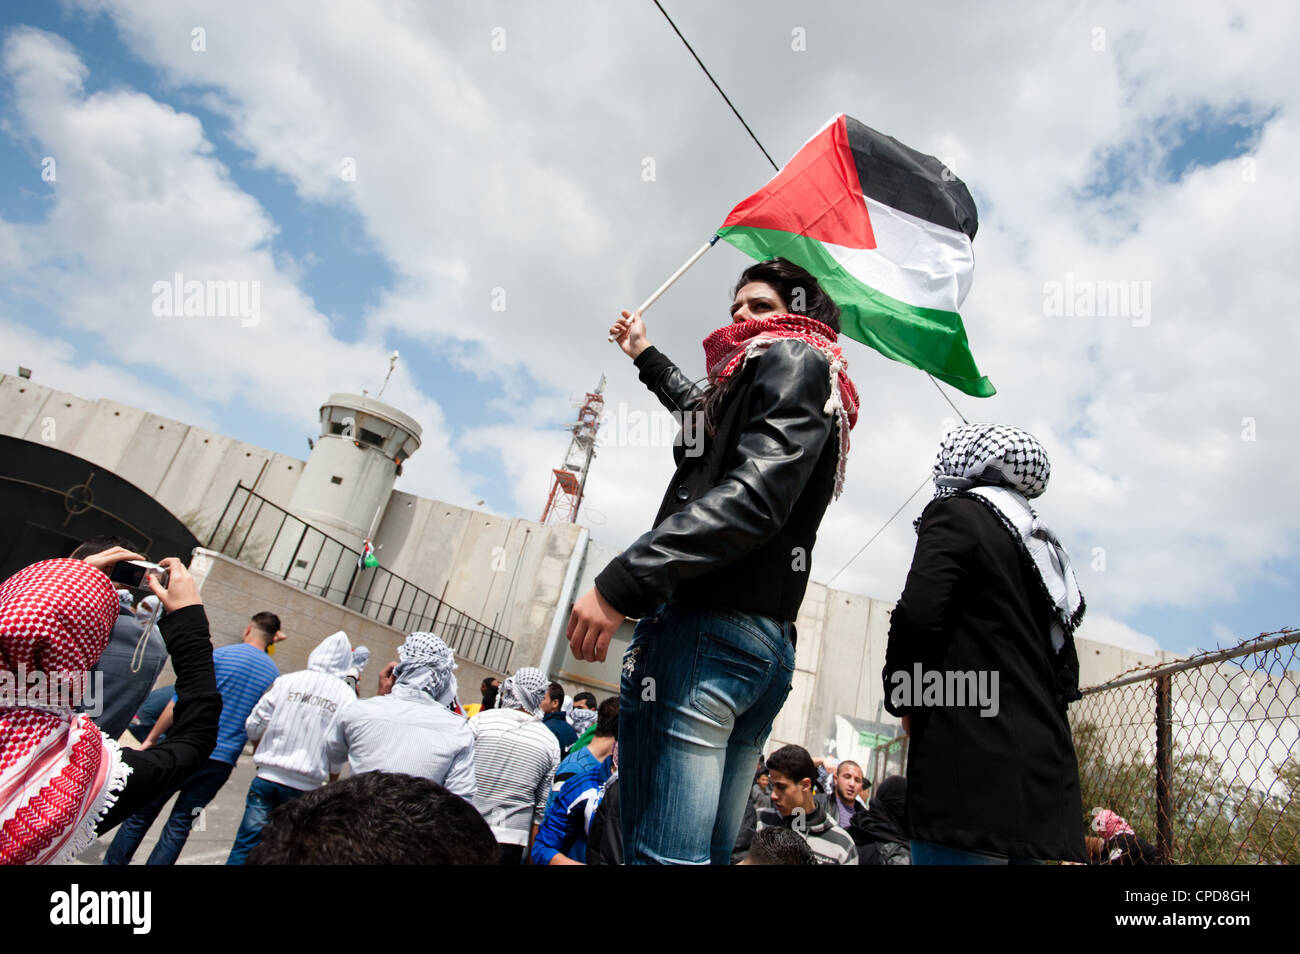 A Palestinian young woman waves a flag near the Bethlehem checkpoint during Land Day protests in Bethlehem. Stock Photo